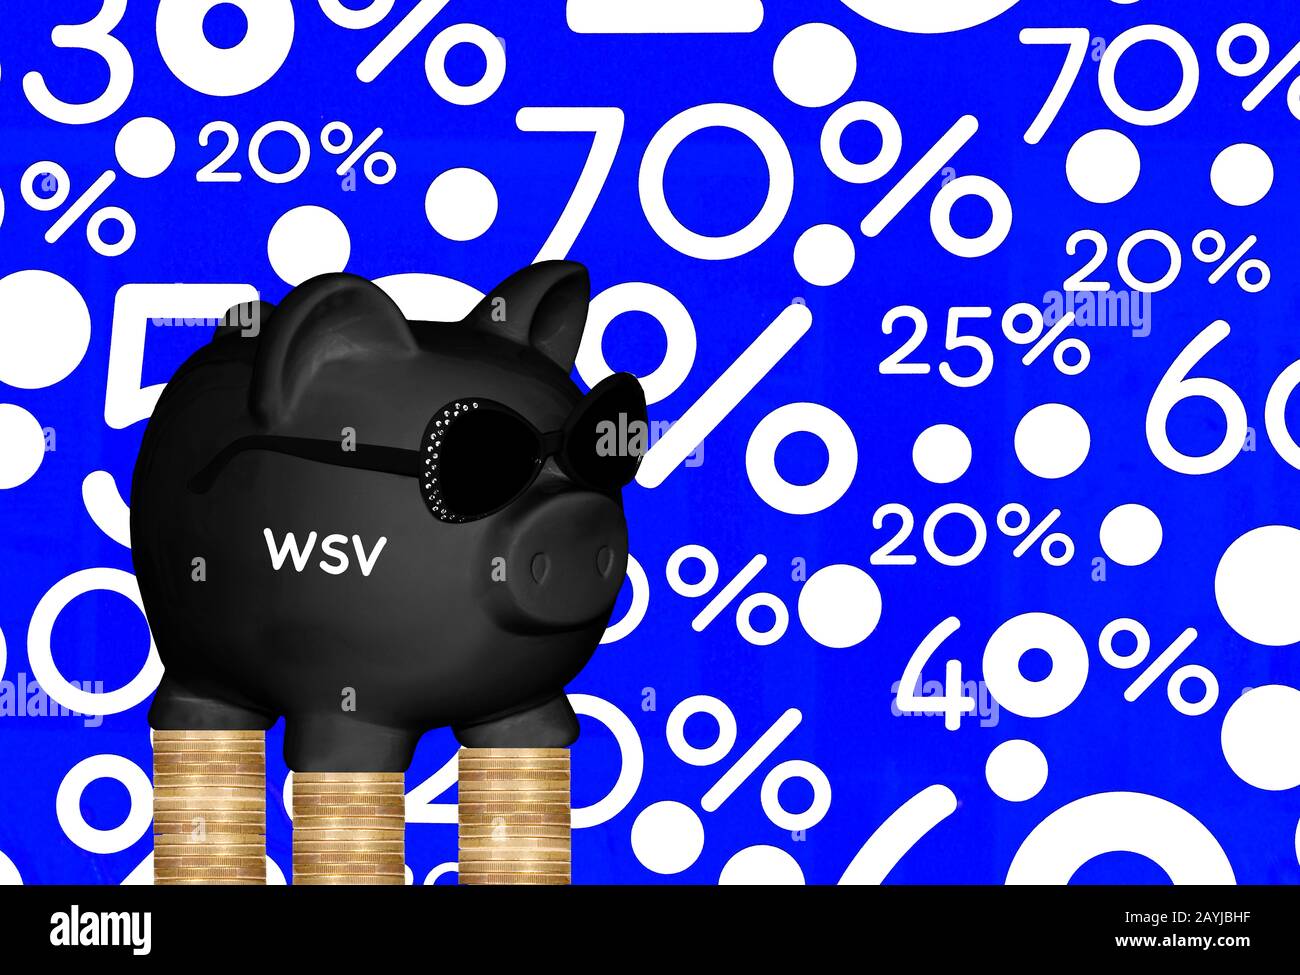 black piggy bank with sunglasses and lettering WSV, special offers and coin stacks in background, composing Stock Photo